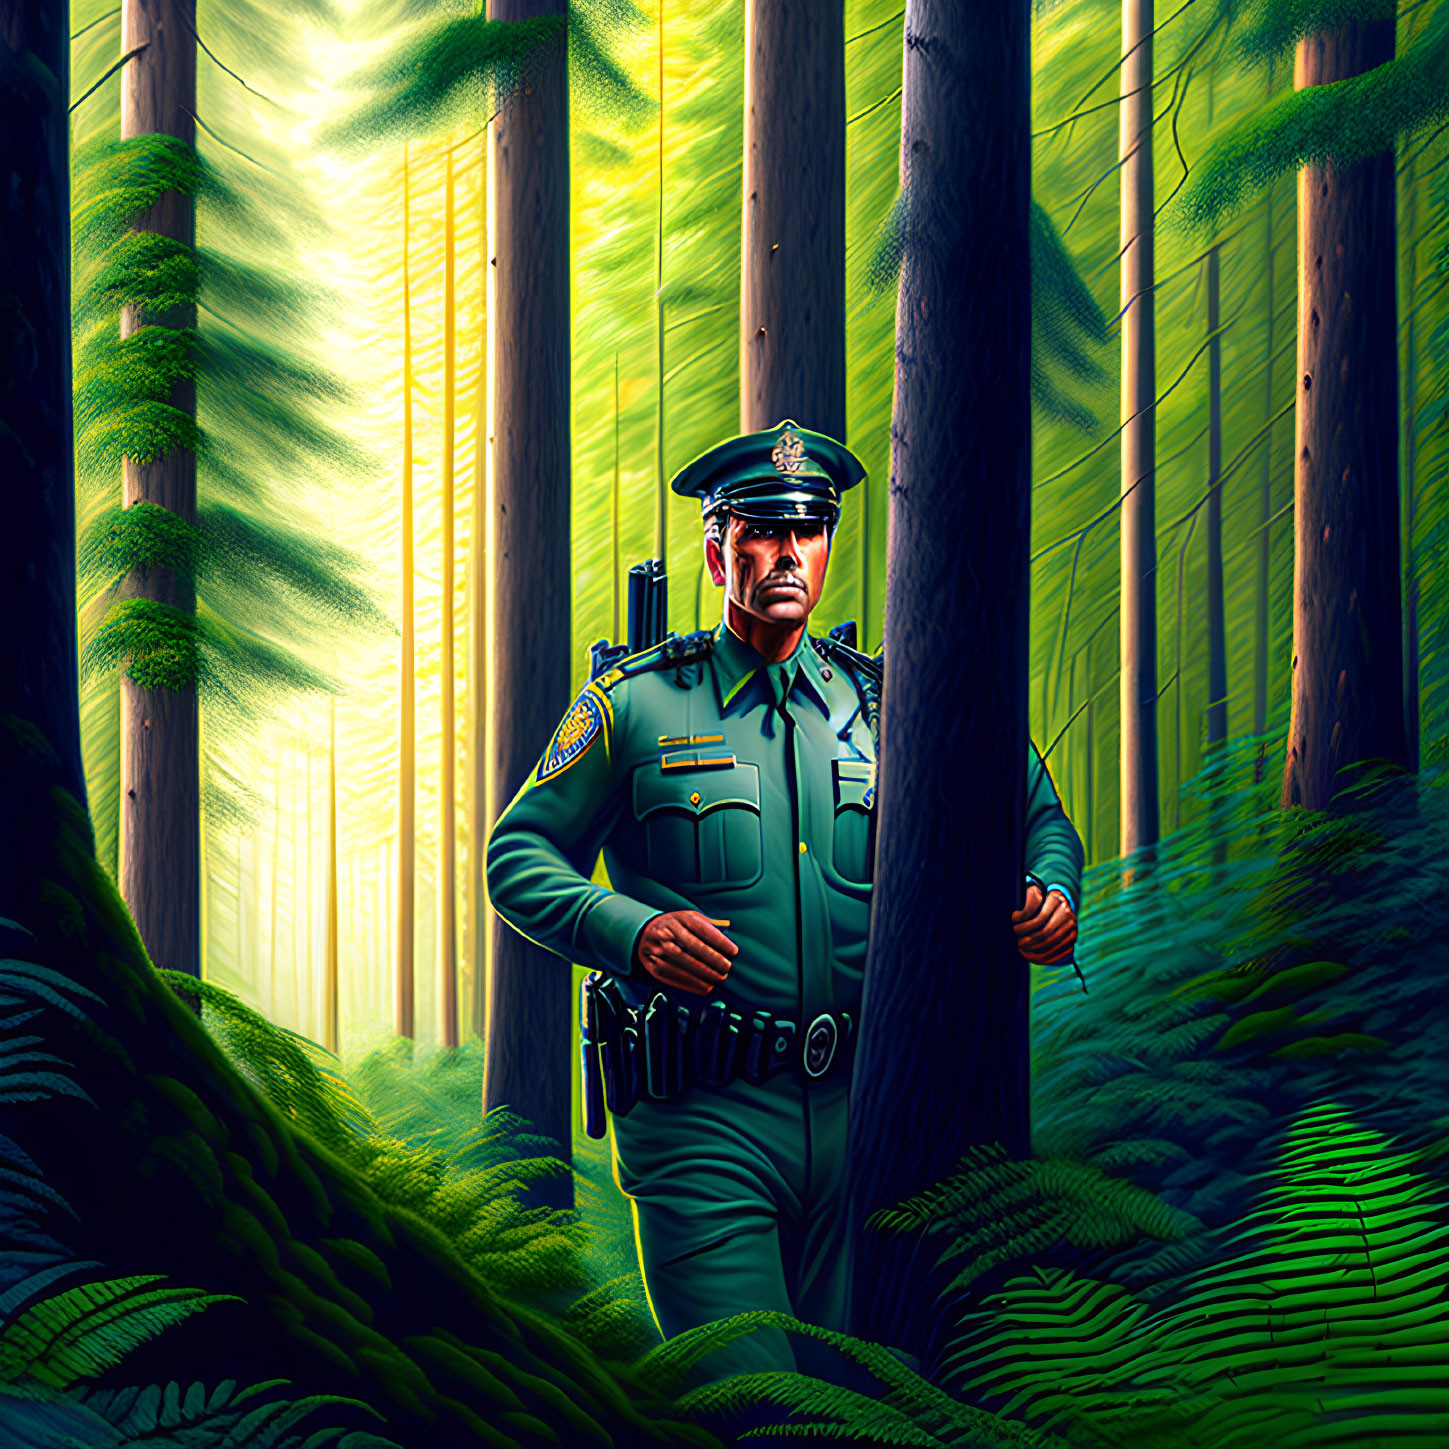 Confident police officer in lush green forest with sun rays